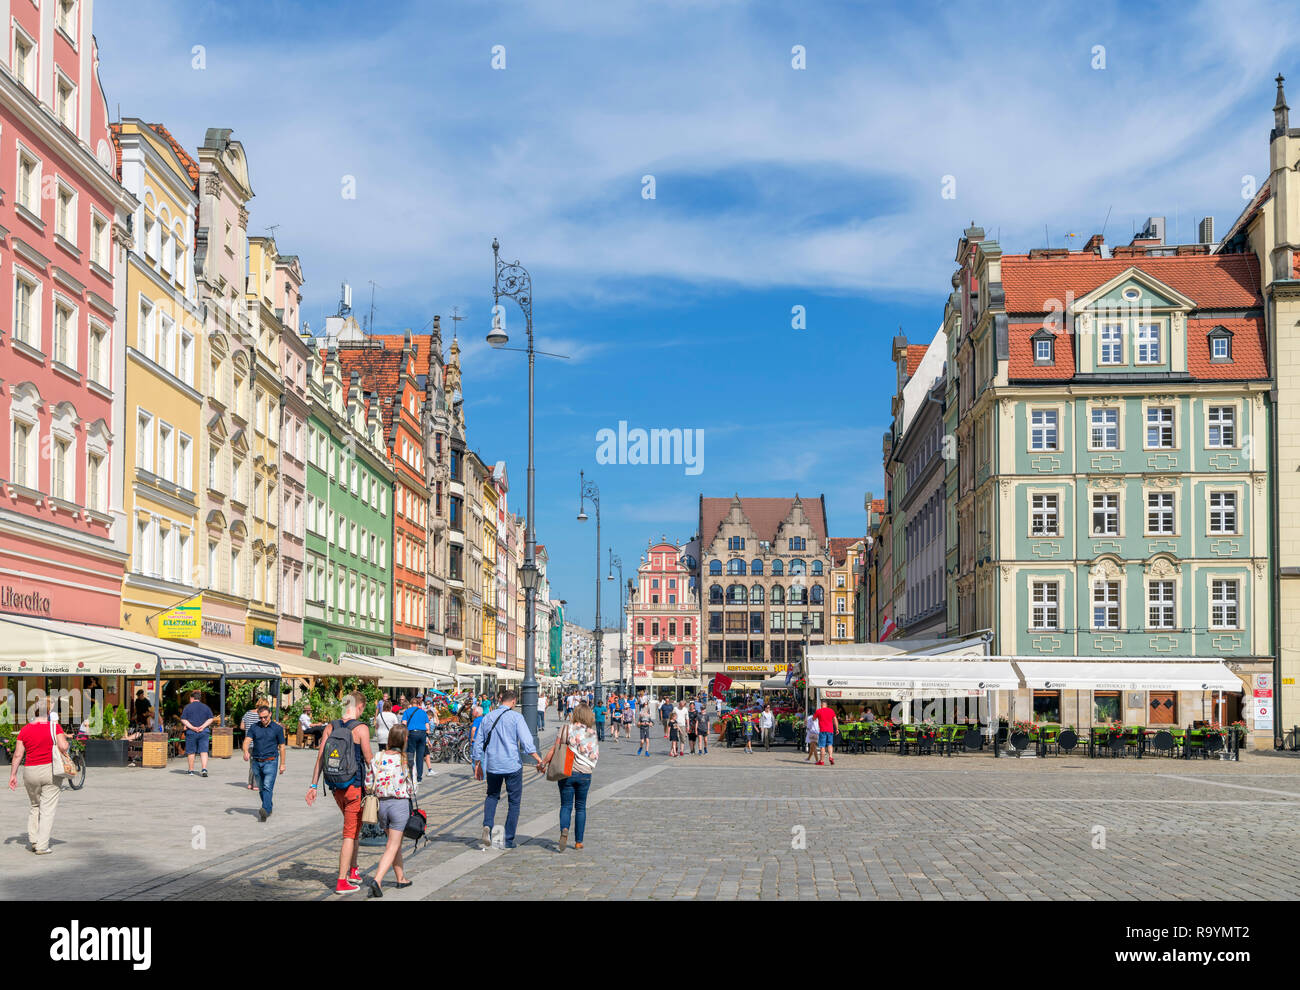 Wroclaw, Old Town (Stare Miasto). Shops and cafes on Market Square (Rynek we Wrocławiu), Wroclaw, Poland Stock Photo